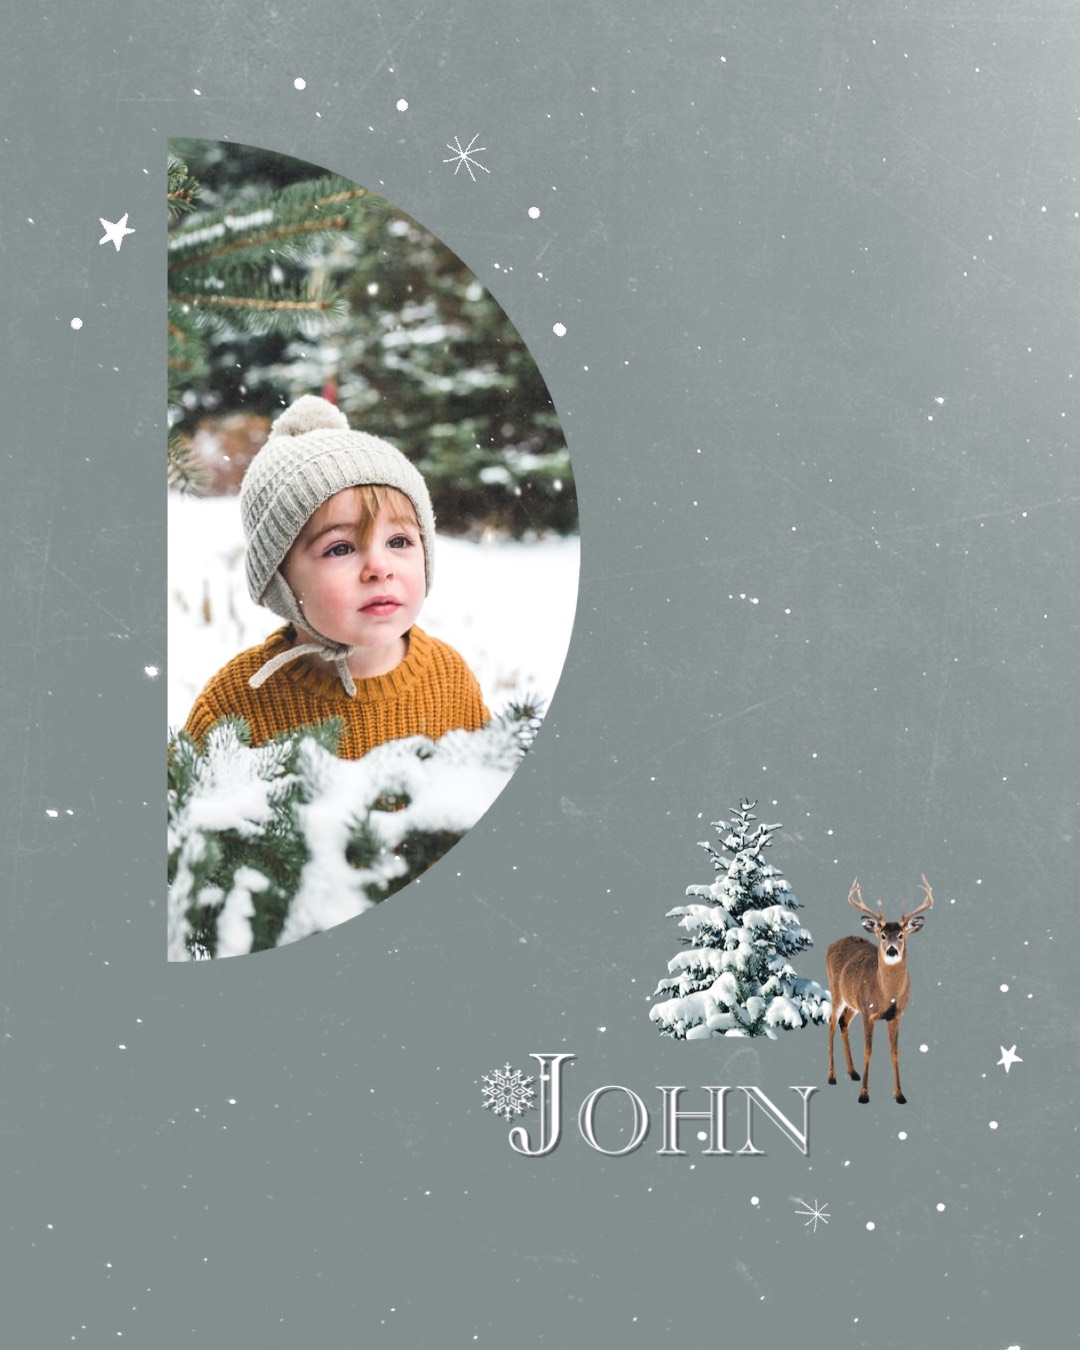 A Young Boy Wearing A Knitted Hat With A Deer In The Background Winter Wonderland Template